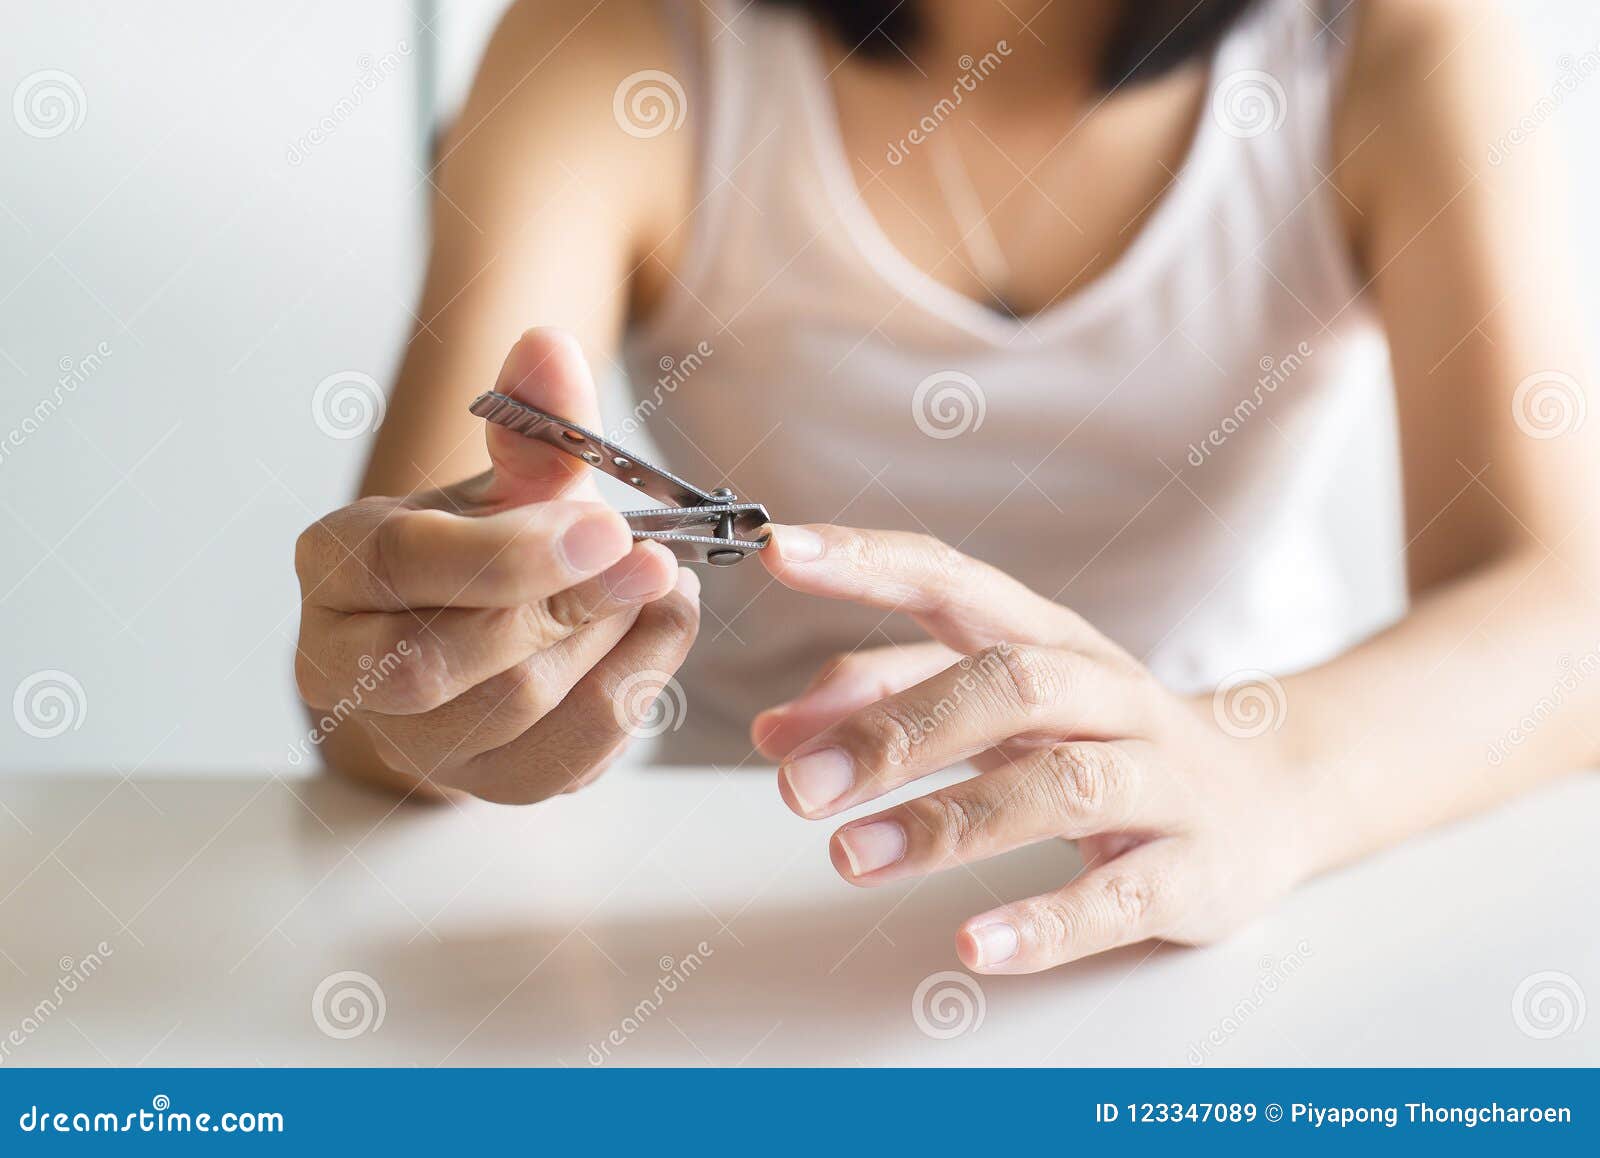 Woman Cutting Nails with Nail Clipper,Female Using Tweezers Close Up Stock  Image - Image of cutter, fingernails: 123347089